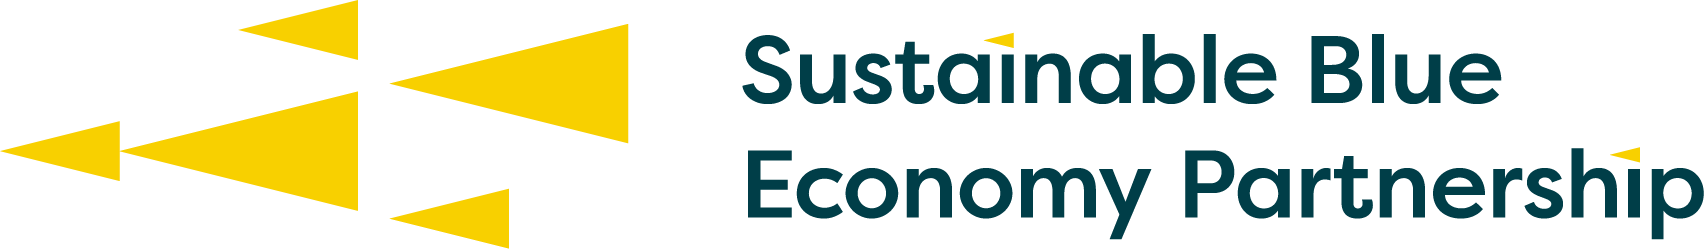 First call of the EU Sustainable Blue Economy Partnership (SBEP) |  Innovationsfonden